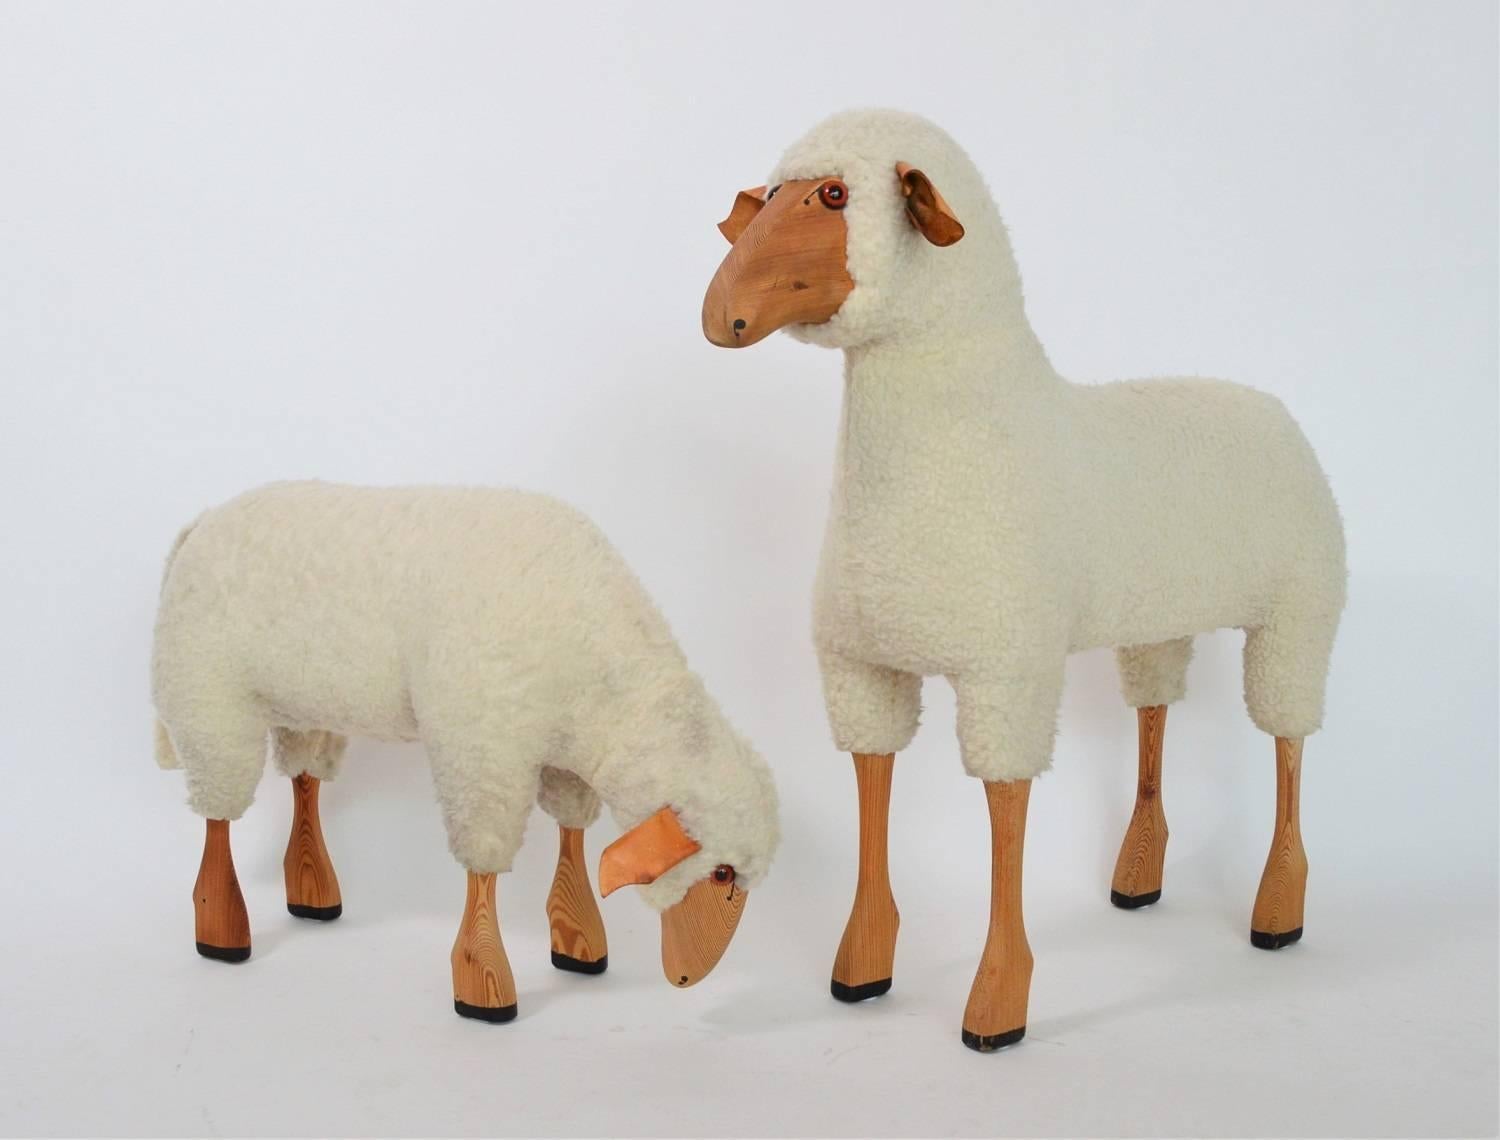 Beautiful set of two pieces of vintage sheep’s handmade of beechwood and sheepskin or fur.
They can be used as decorative objects only but are also adapted as small children seats.
The sheep’s are in lifesize and for their age in very good vintage